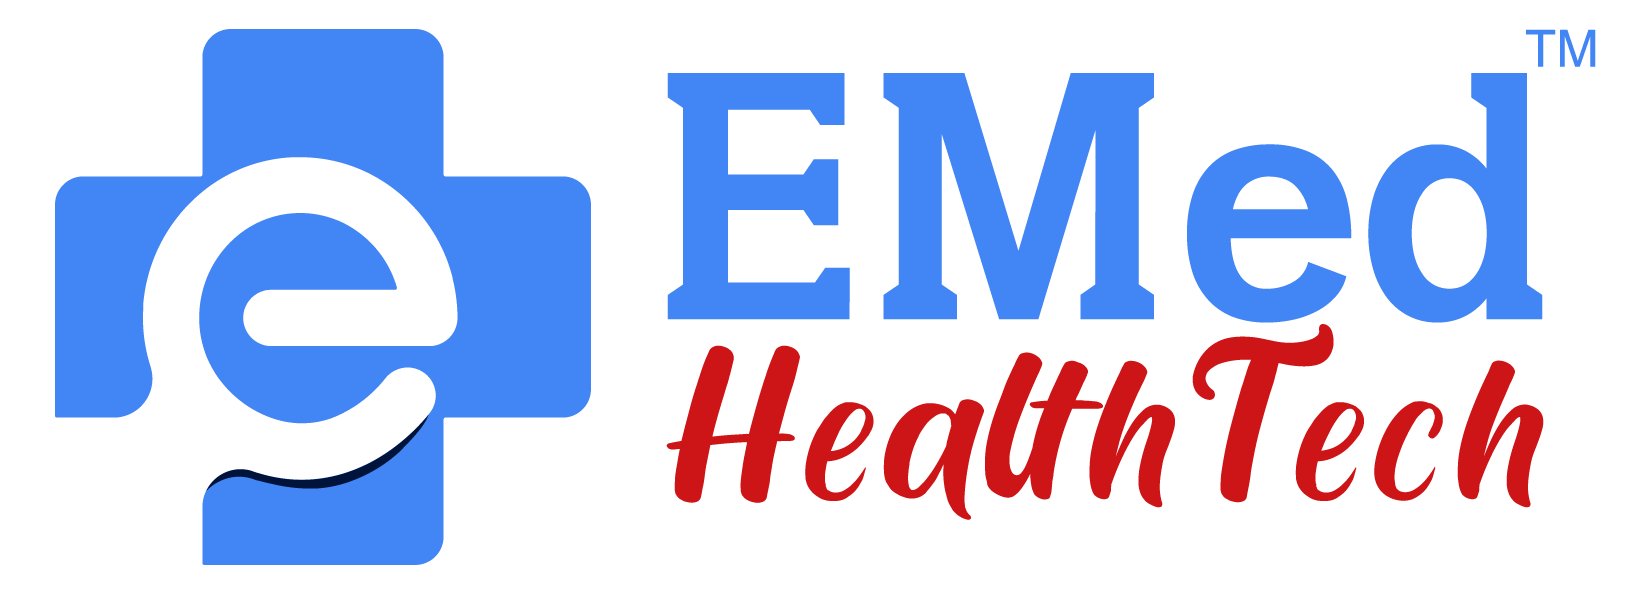 Introduction to #EMedStore Platform and Services